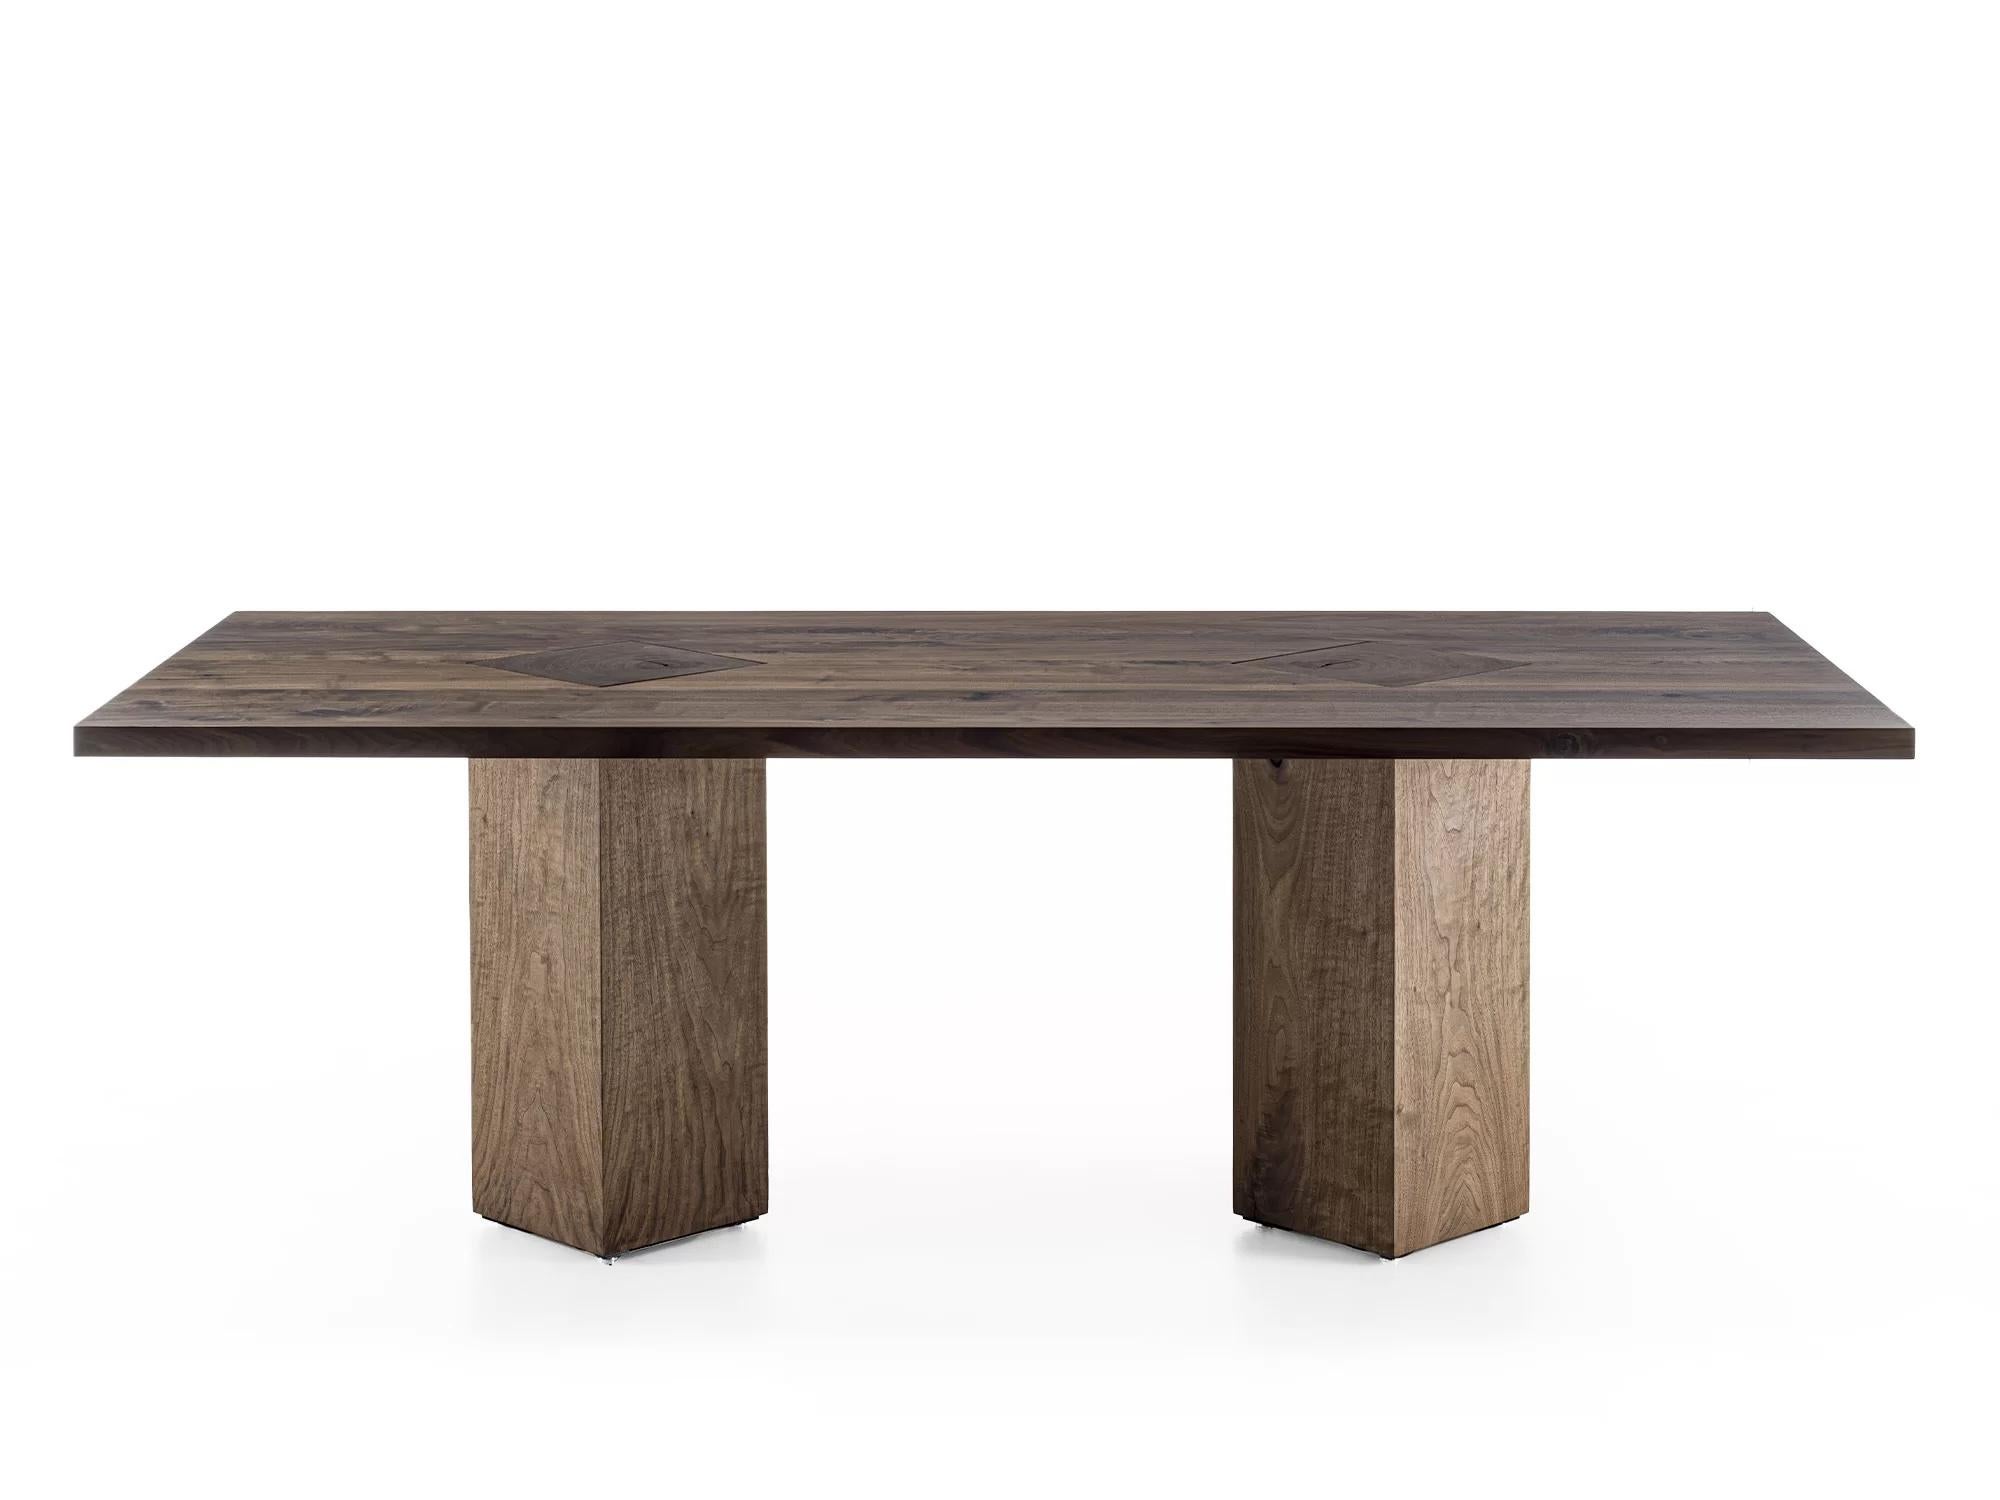 Table with a solid wood top with glued slats, characterized by its exposed legs, intersecting with the top, made from tree trunk sections, and rotated to a 45° angle.

Designed by Authentic Design and Made in Italy.
Many sizes offered, please